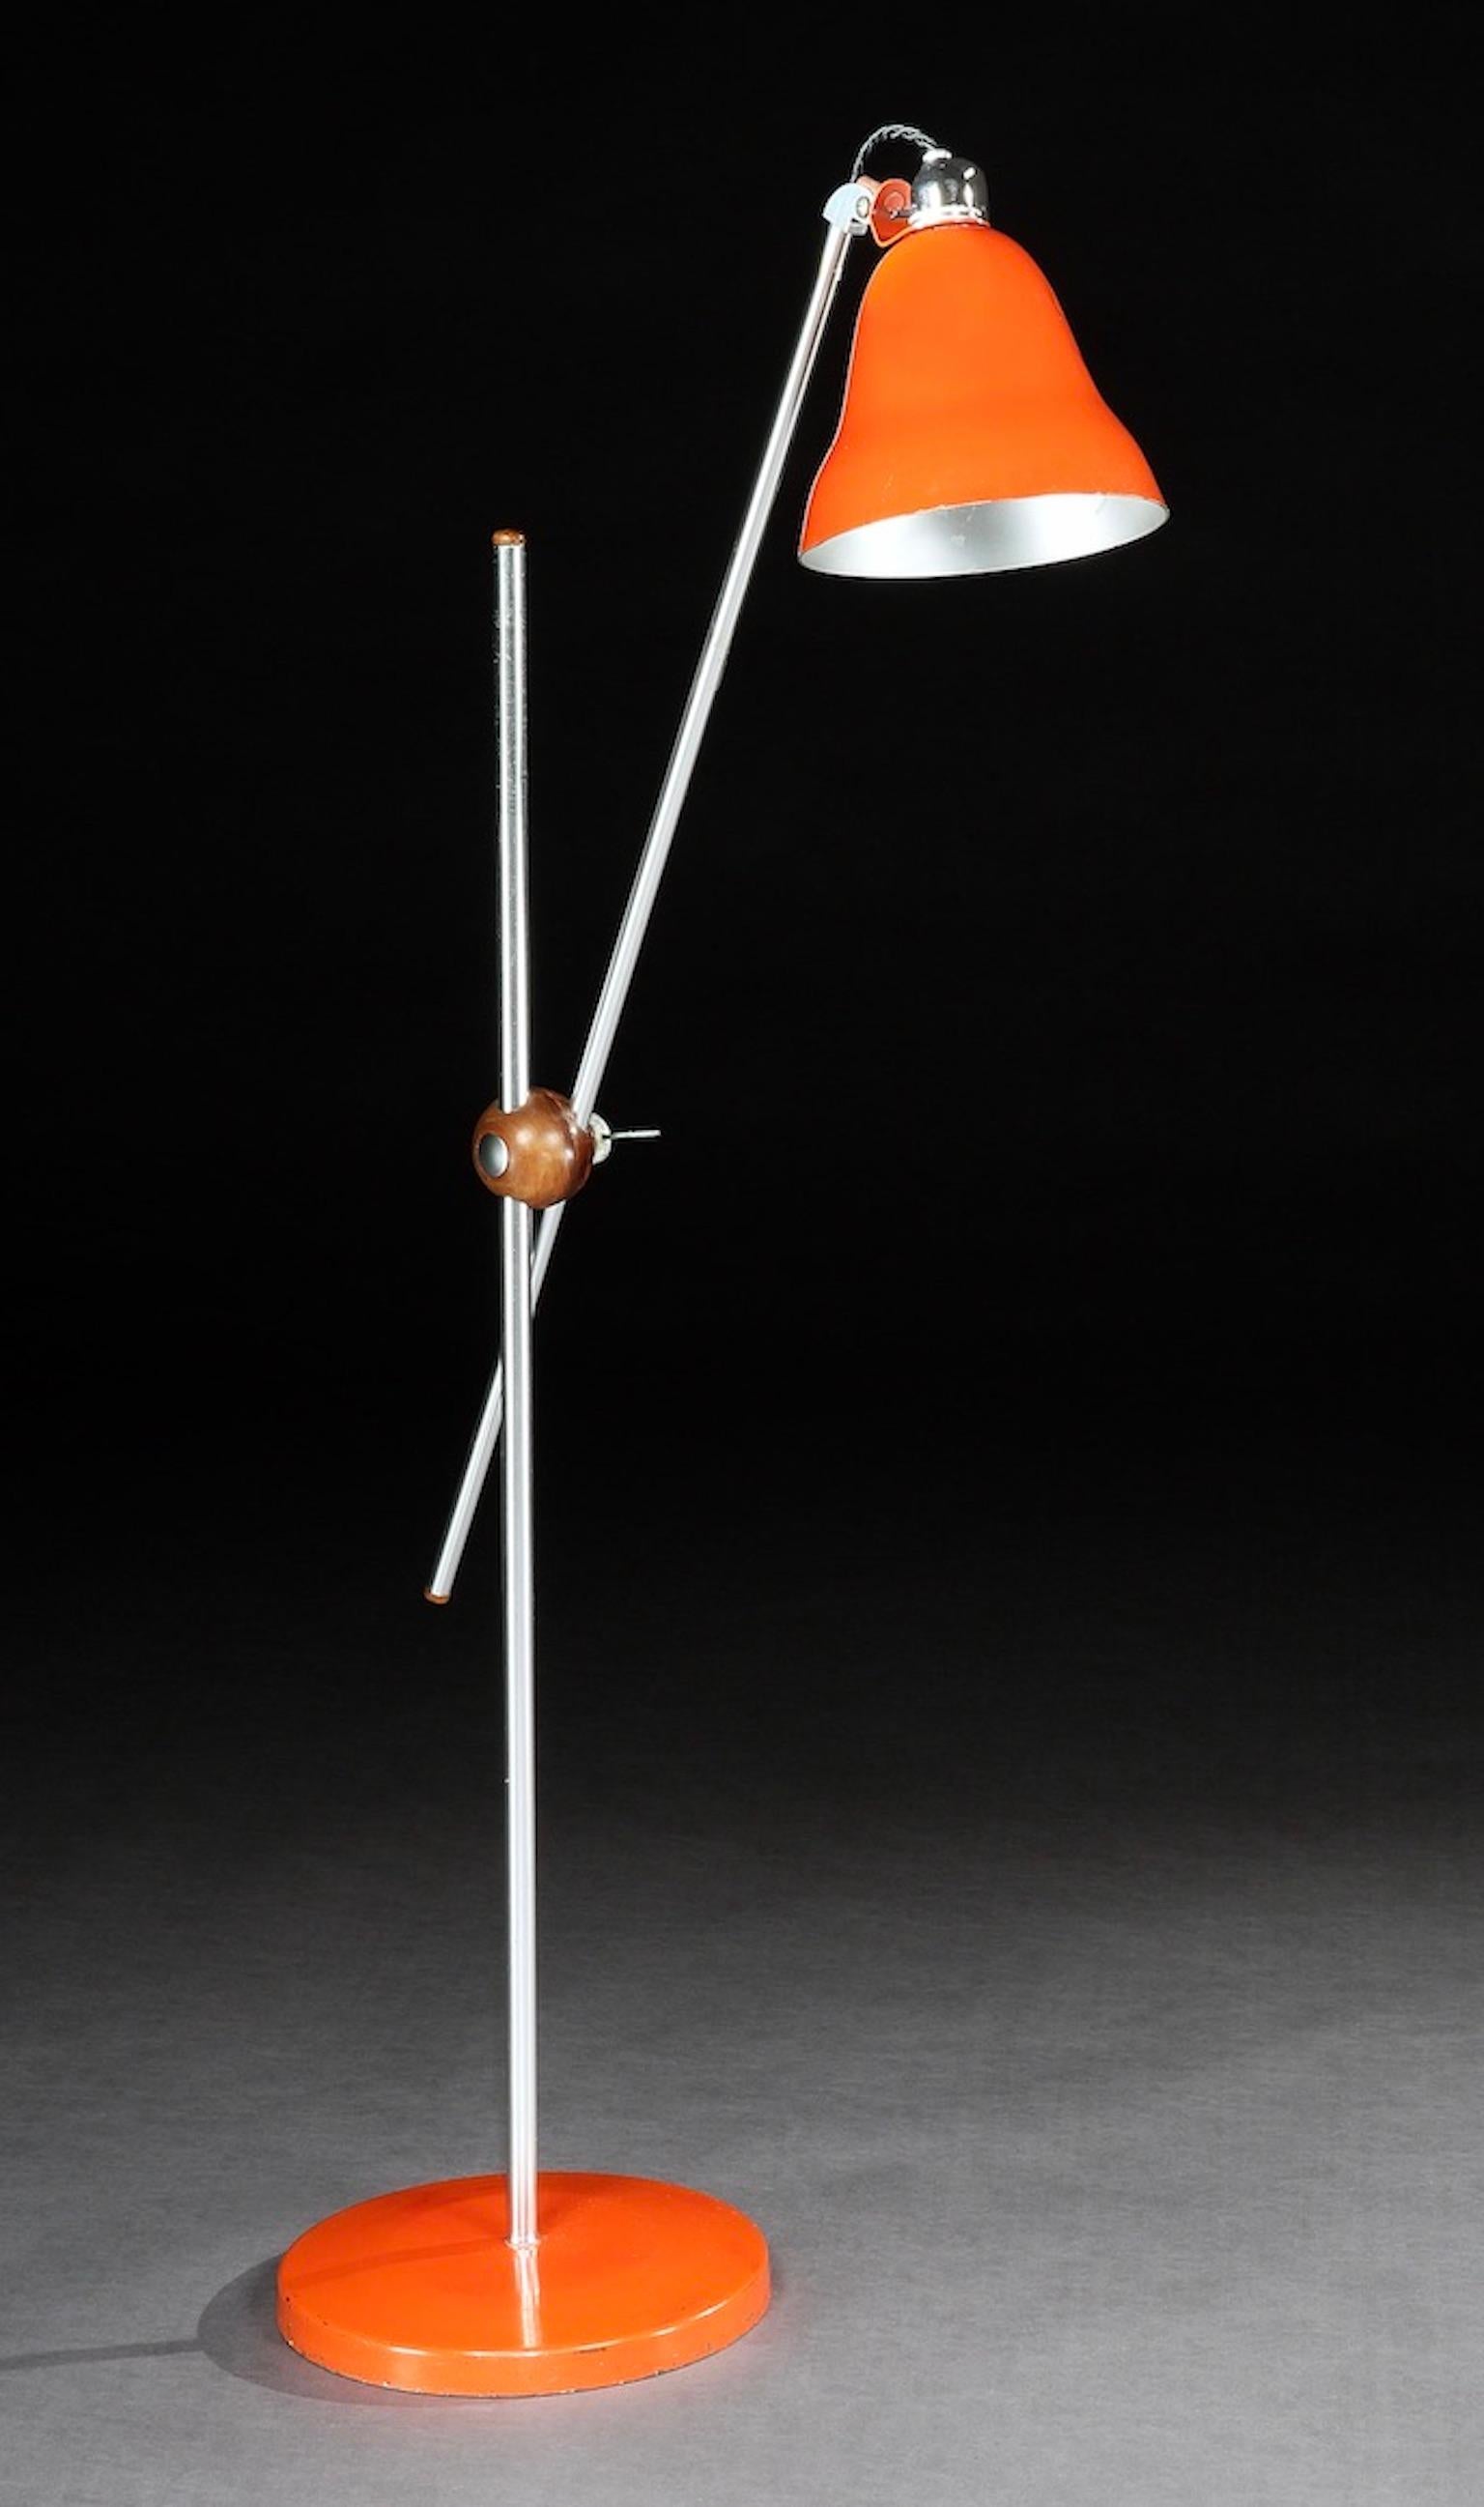 Mid-Century Modern, orange enameled, extending floor standing or reading lamp with original shade extending to 66 inches

- Elegant pared down form amalgamating three materials, metal, enamel, wood.
- Practical adjustable arm extending to 66